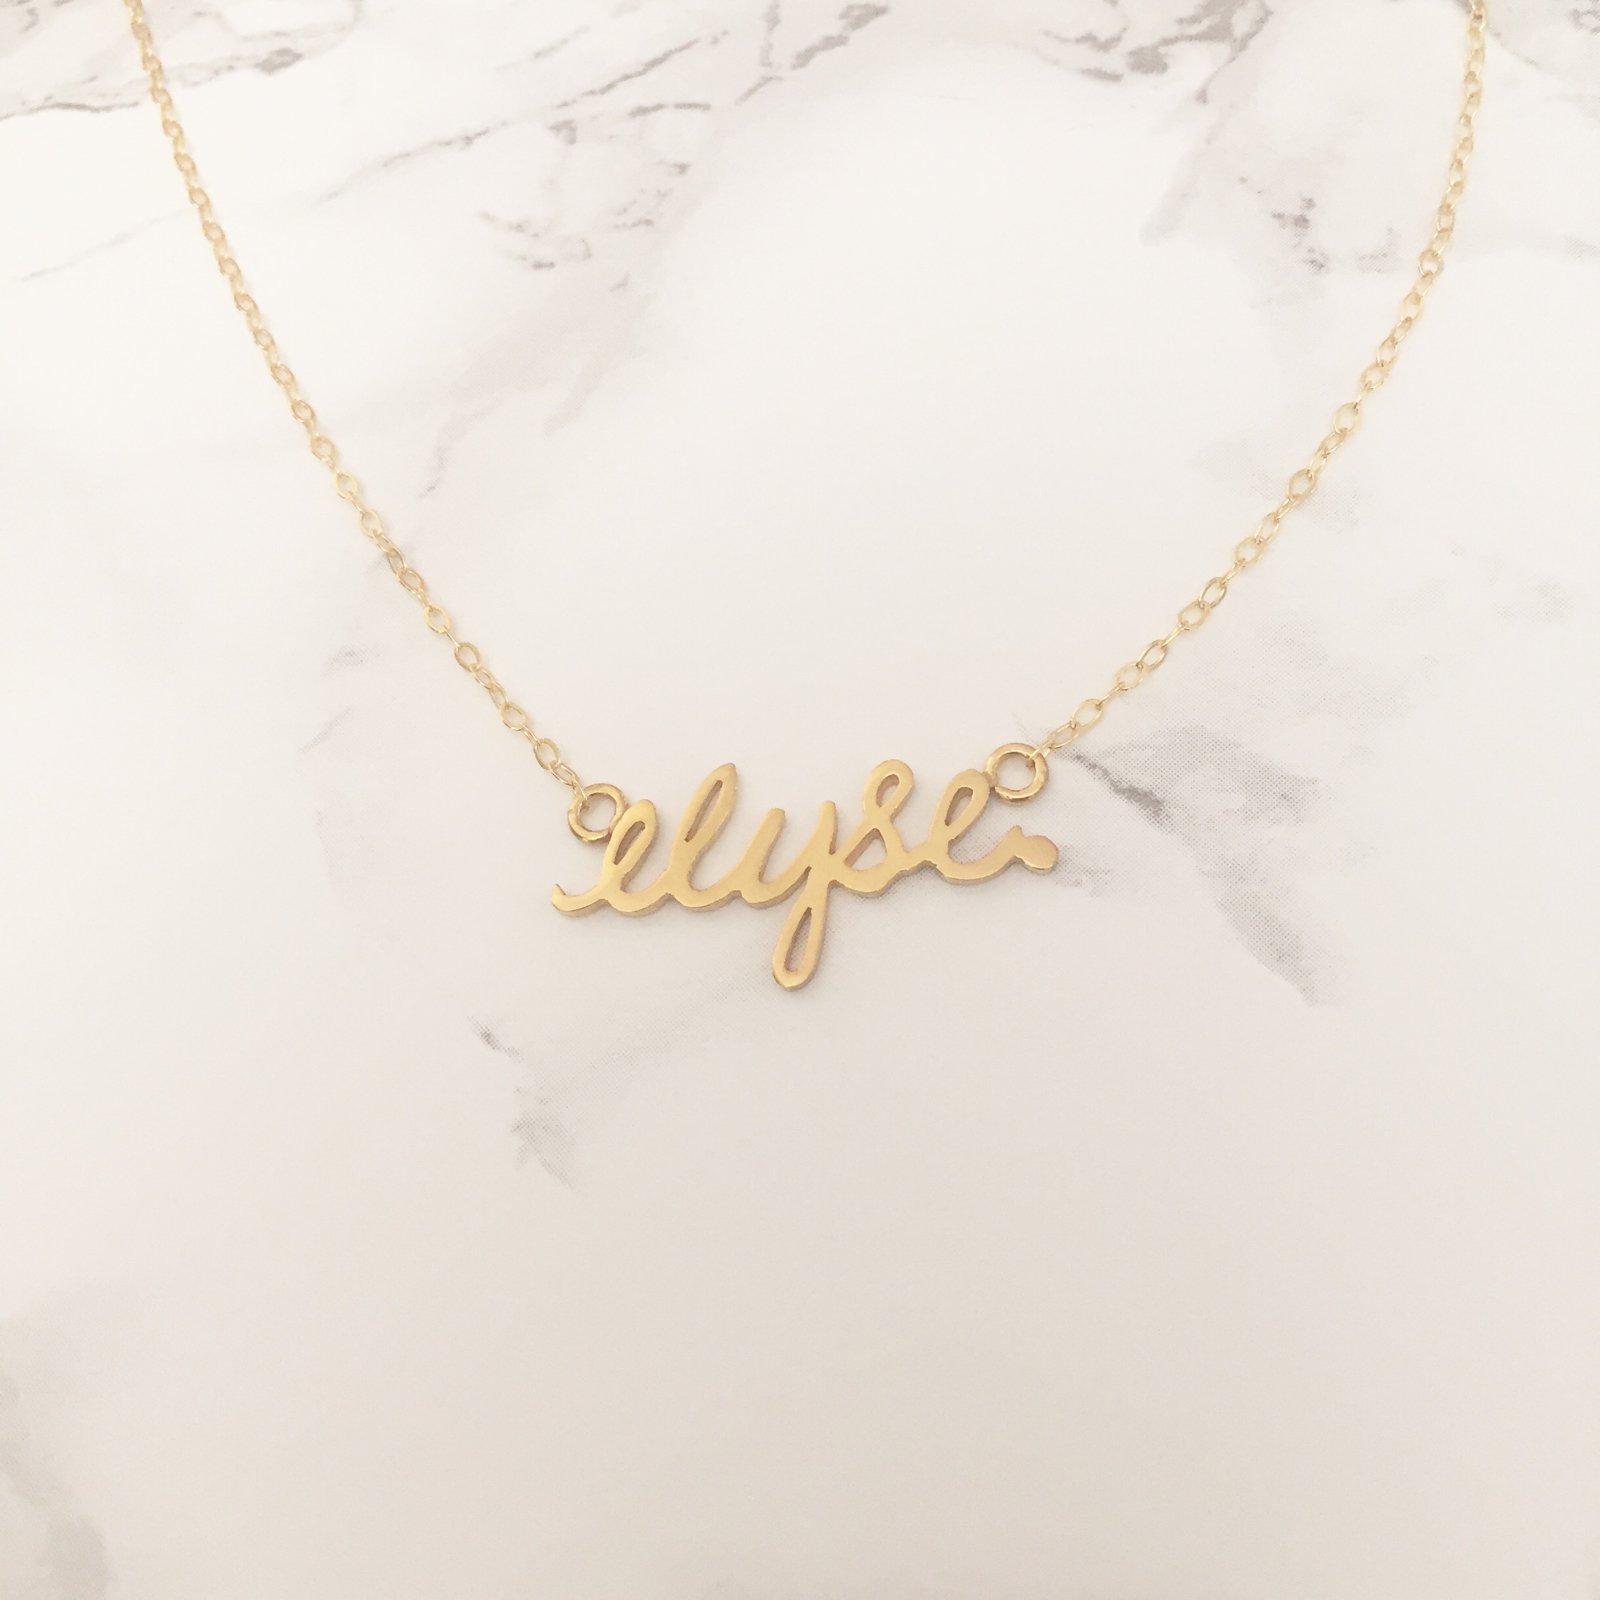 Custom made handwriting signature necklace with Singapore chain in Sterling  Silver or solid karat gold.